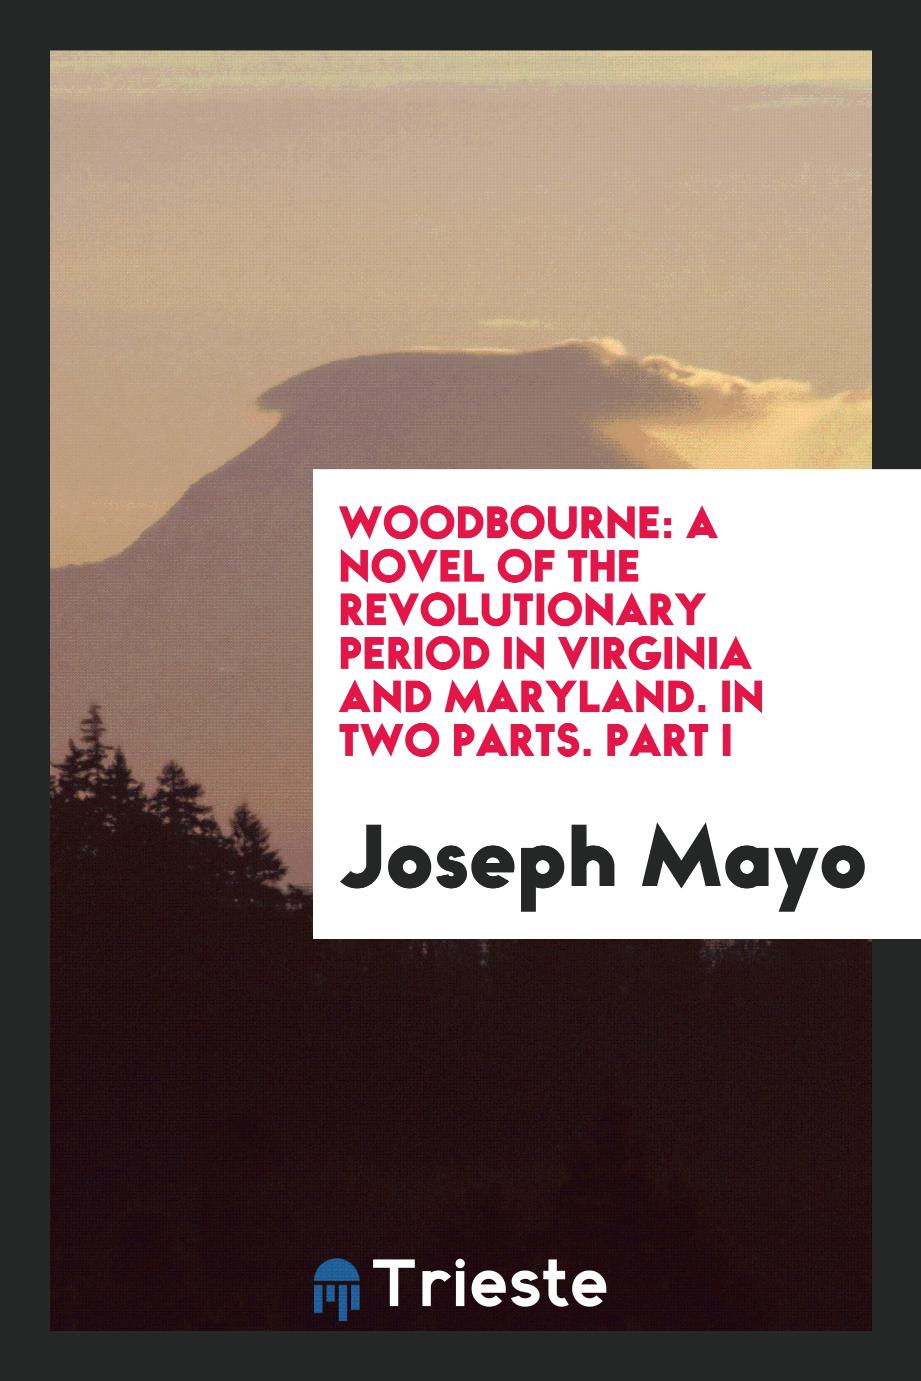 Woodbourne: a novel of the Revolutionary period in Virginia and Maryland. In two parts. Part I